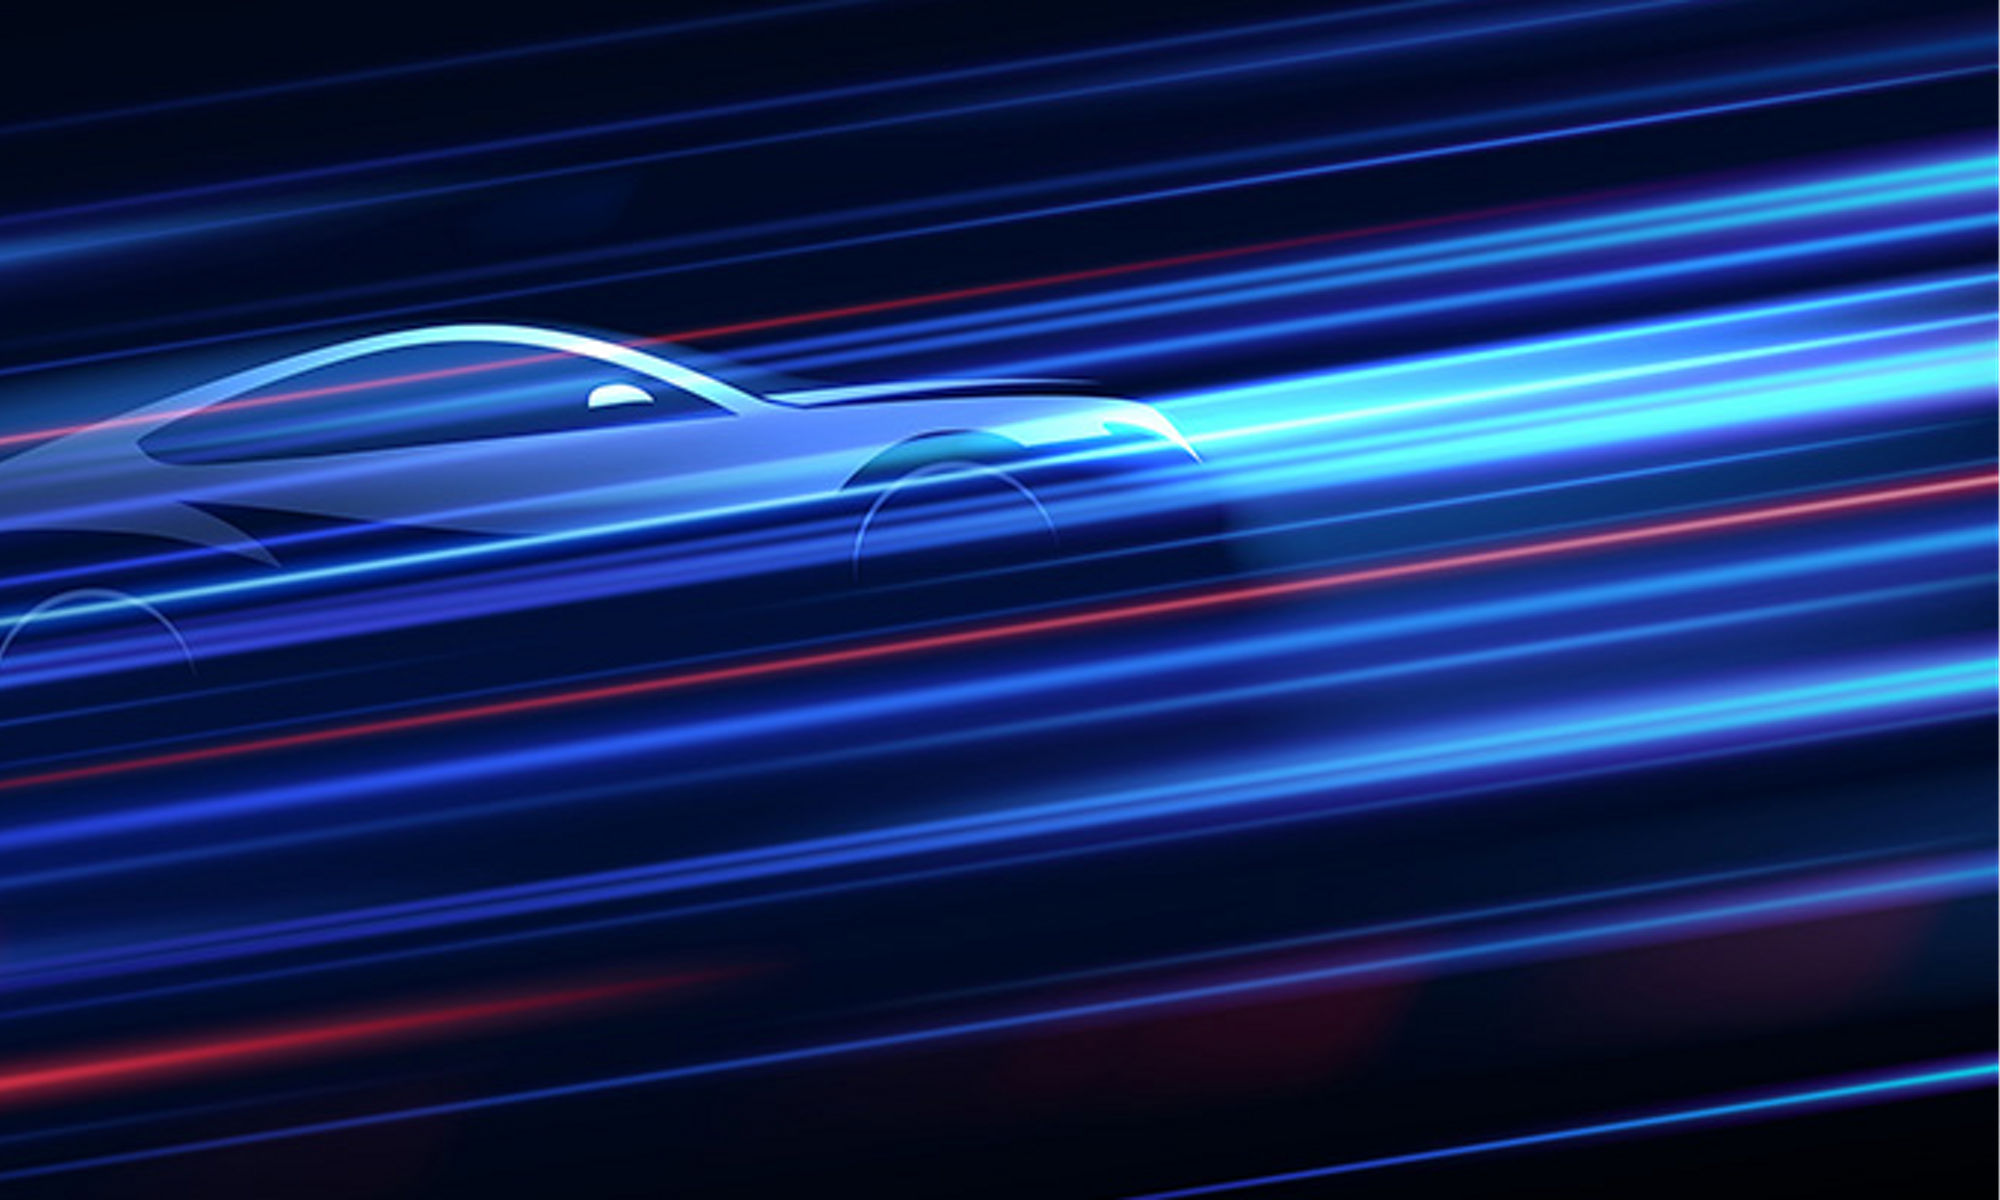 car zipping through red and blue lights